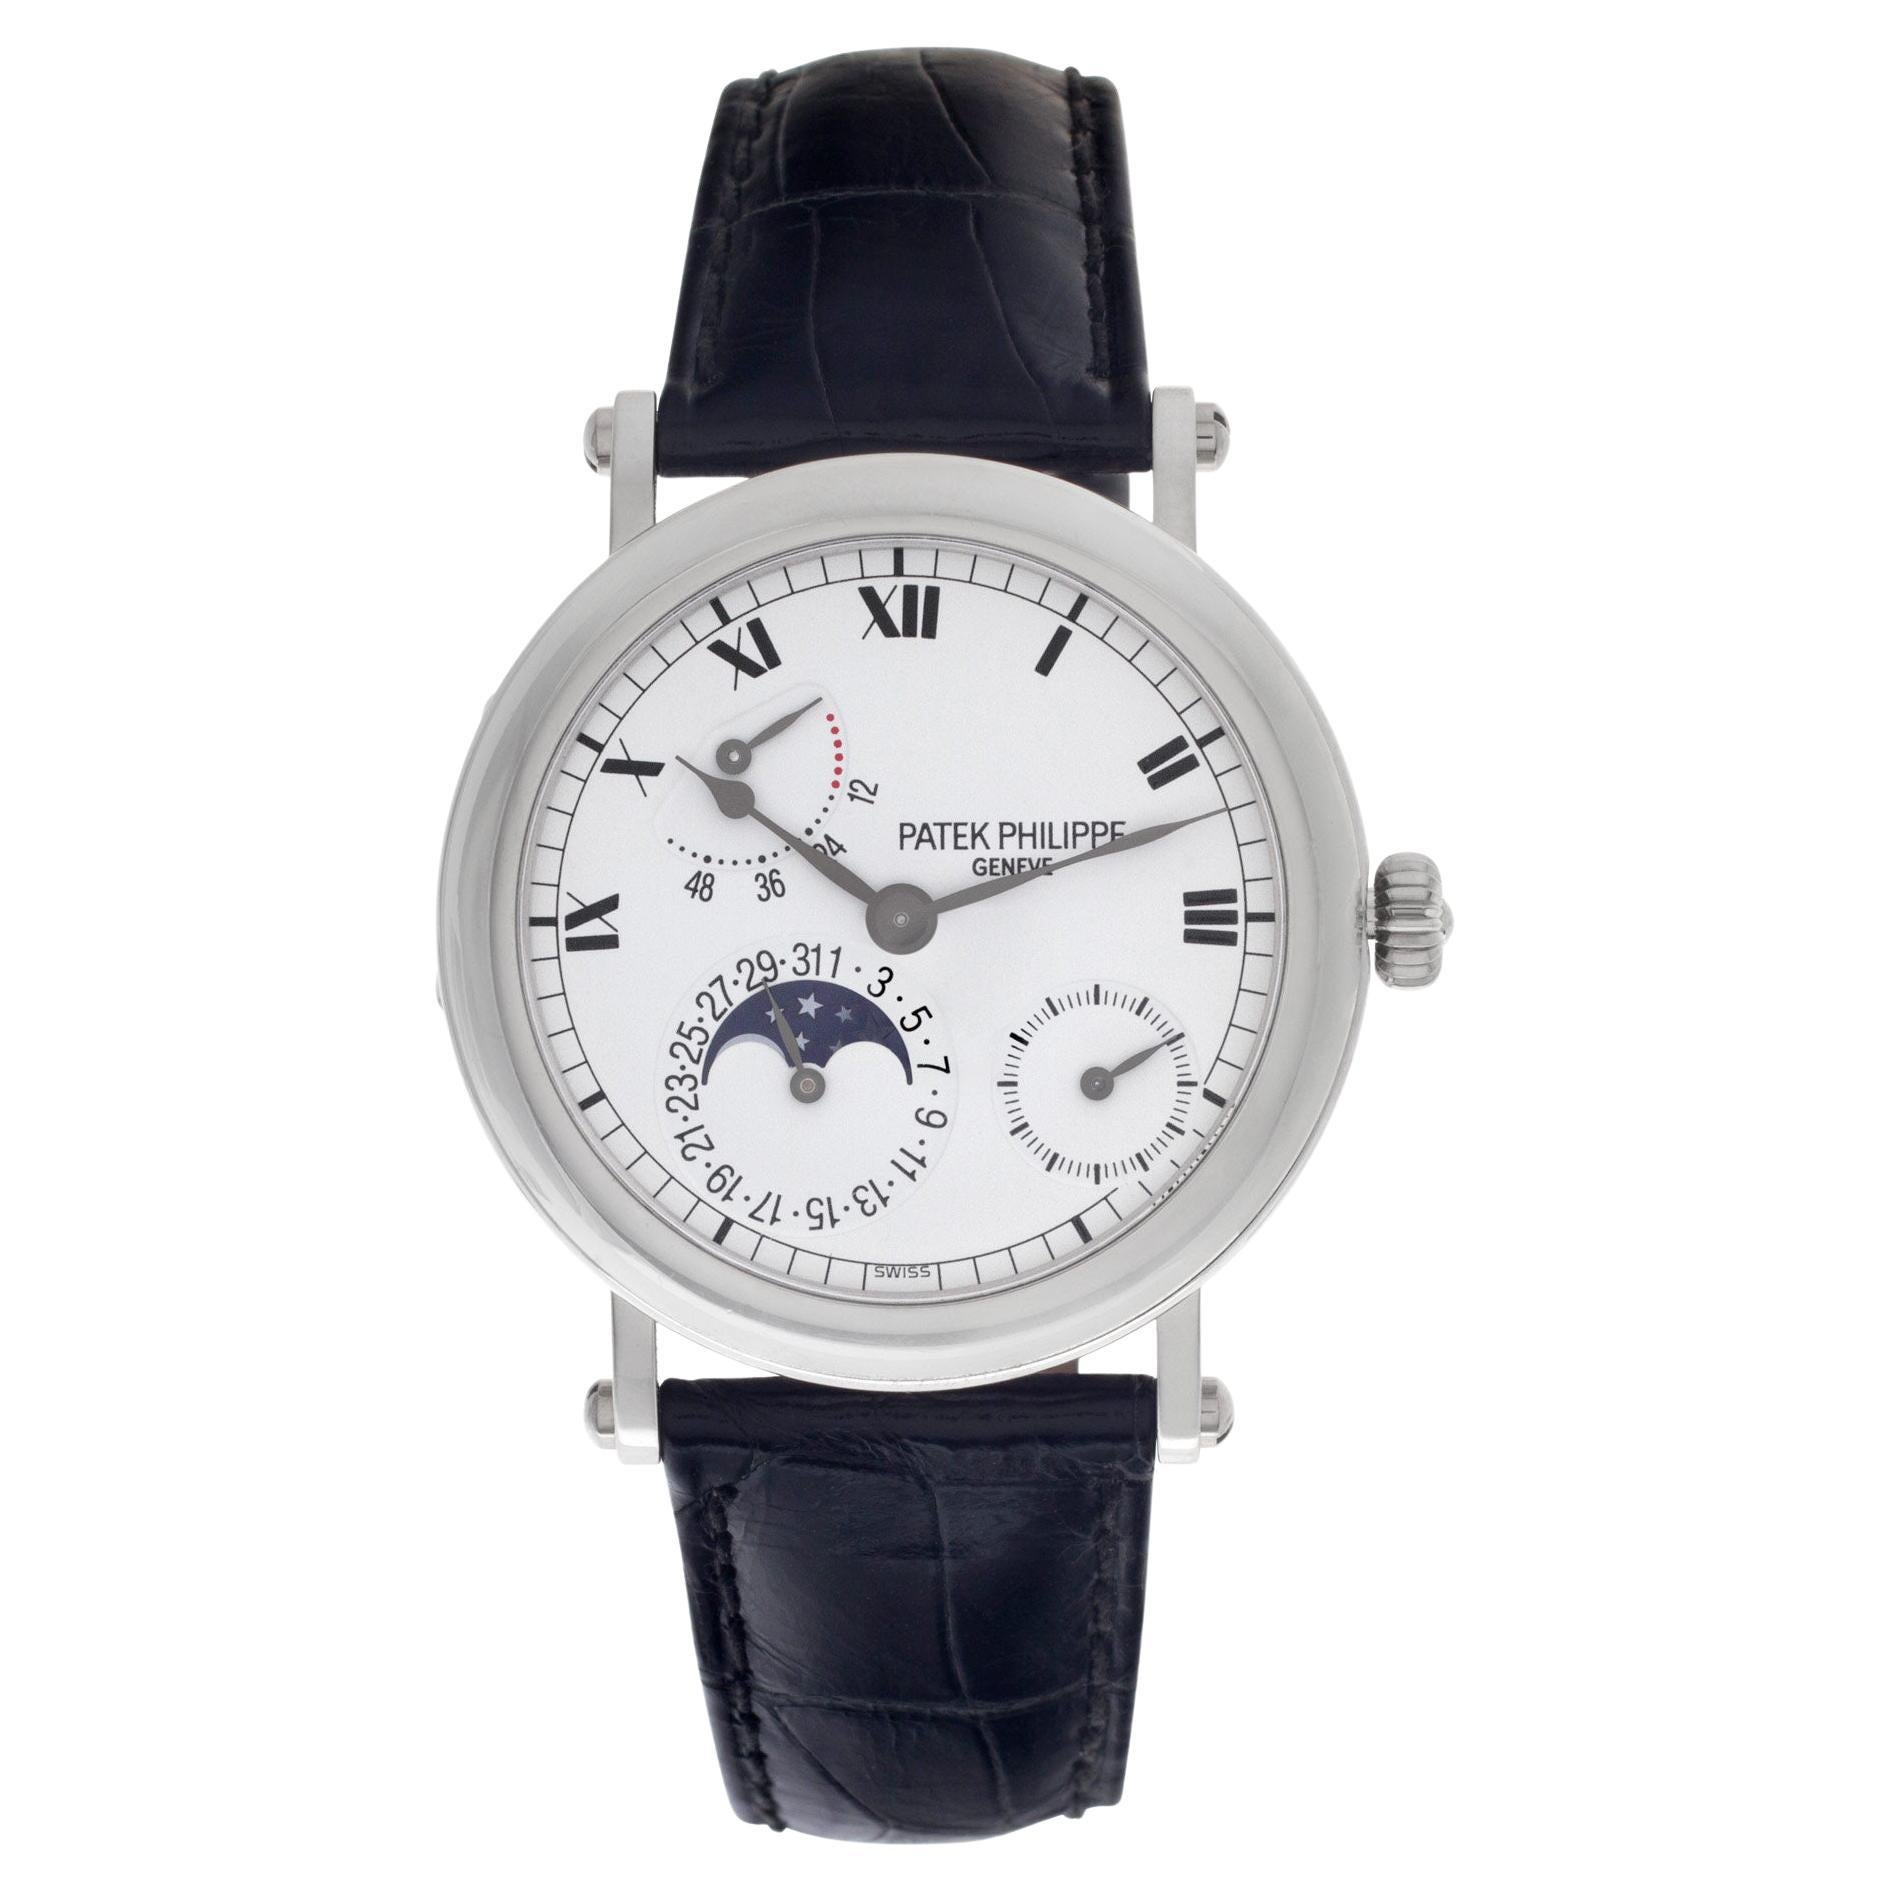 Patek Philippe Power Reserve in Platinum with Date, Moonphase, Sub-Seconds